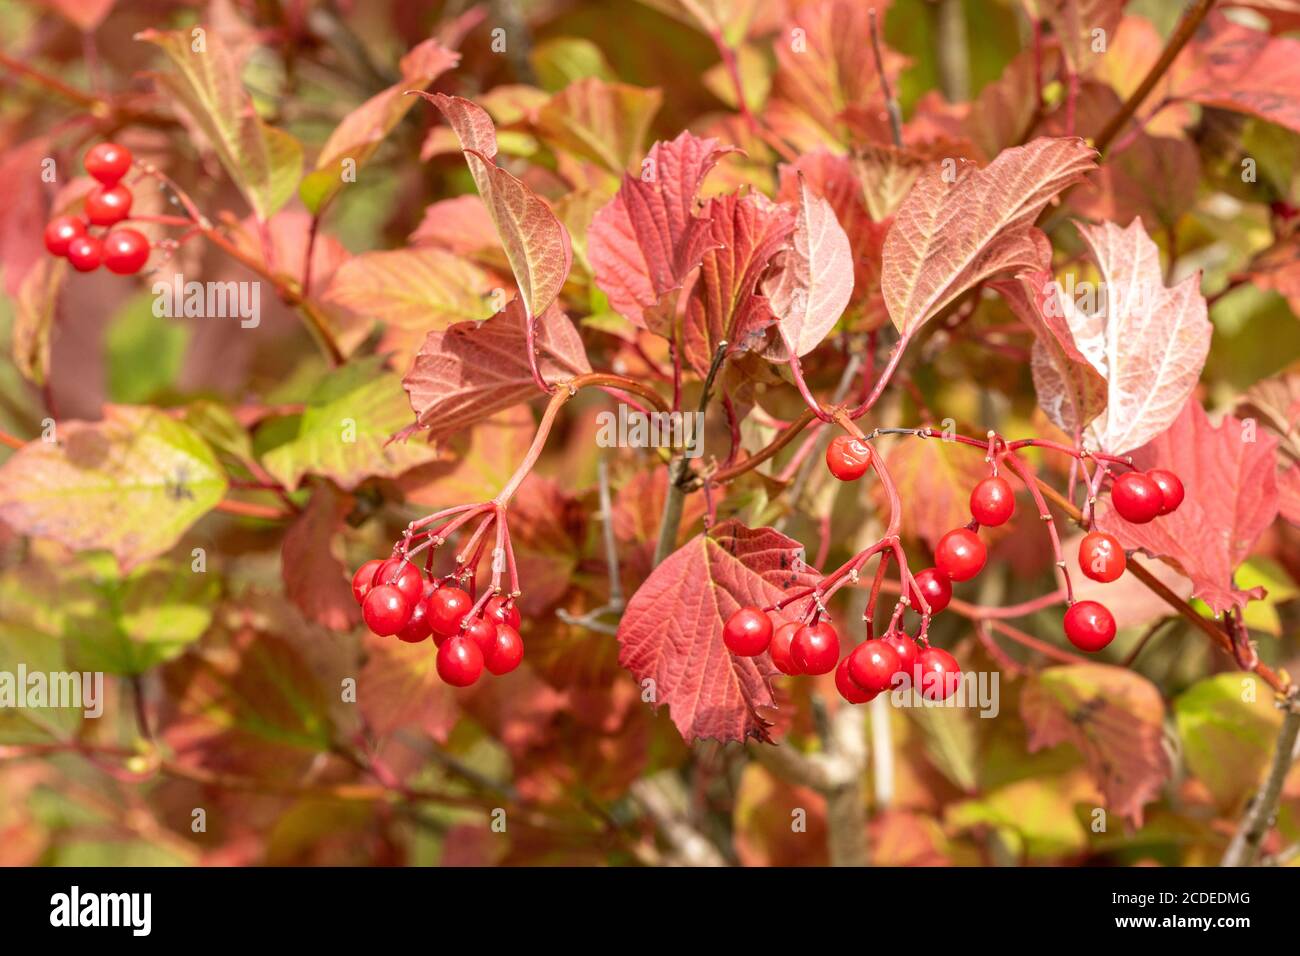 Wild guelder rose (Viburnum opulus) with red berries and leaves in a hedgerow during late summer, early autumn, UK Stock Photo